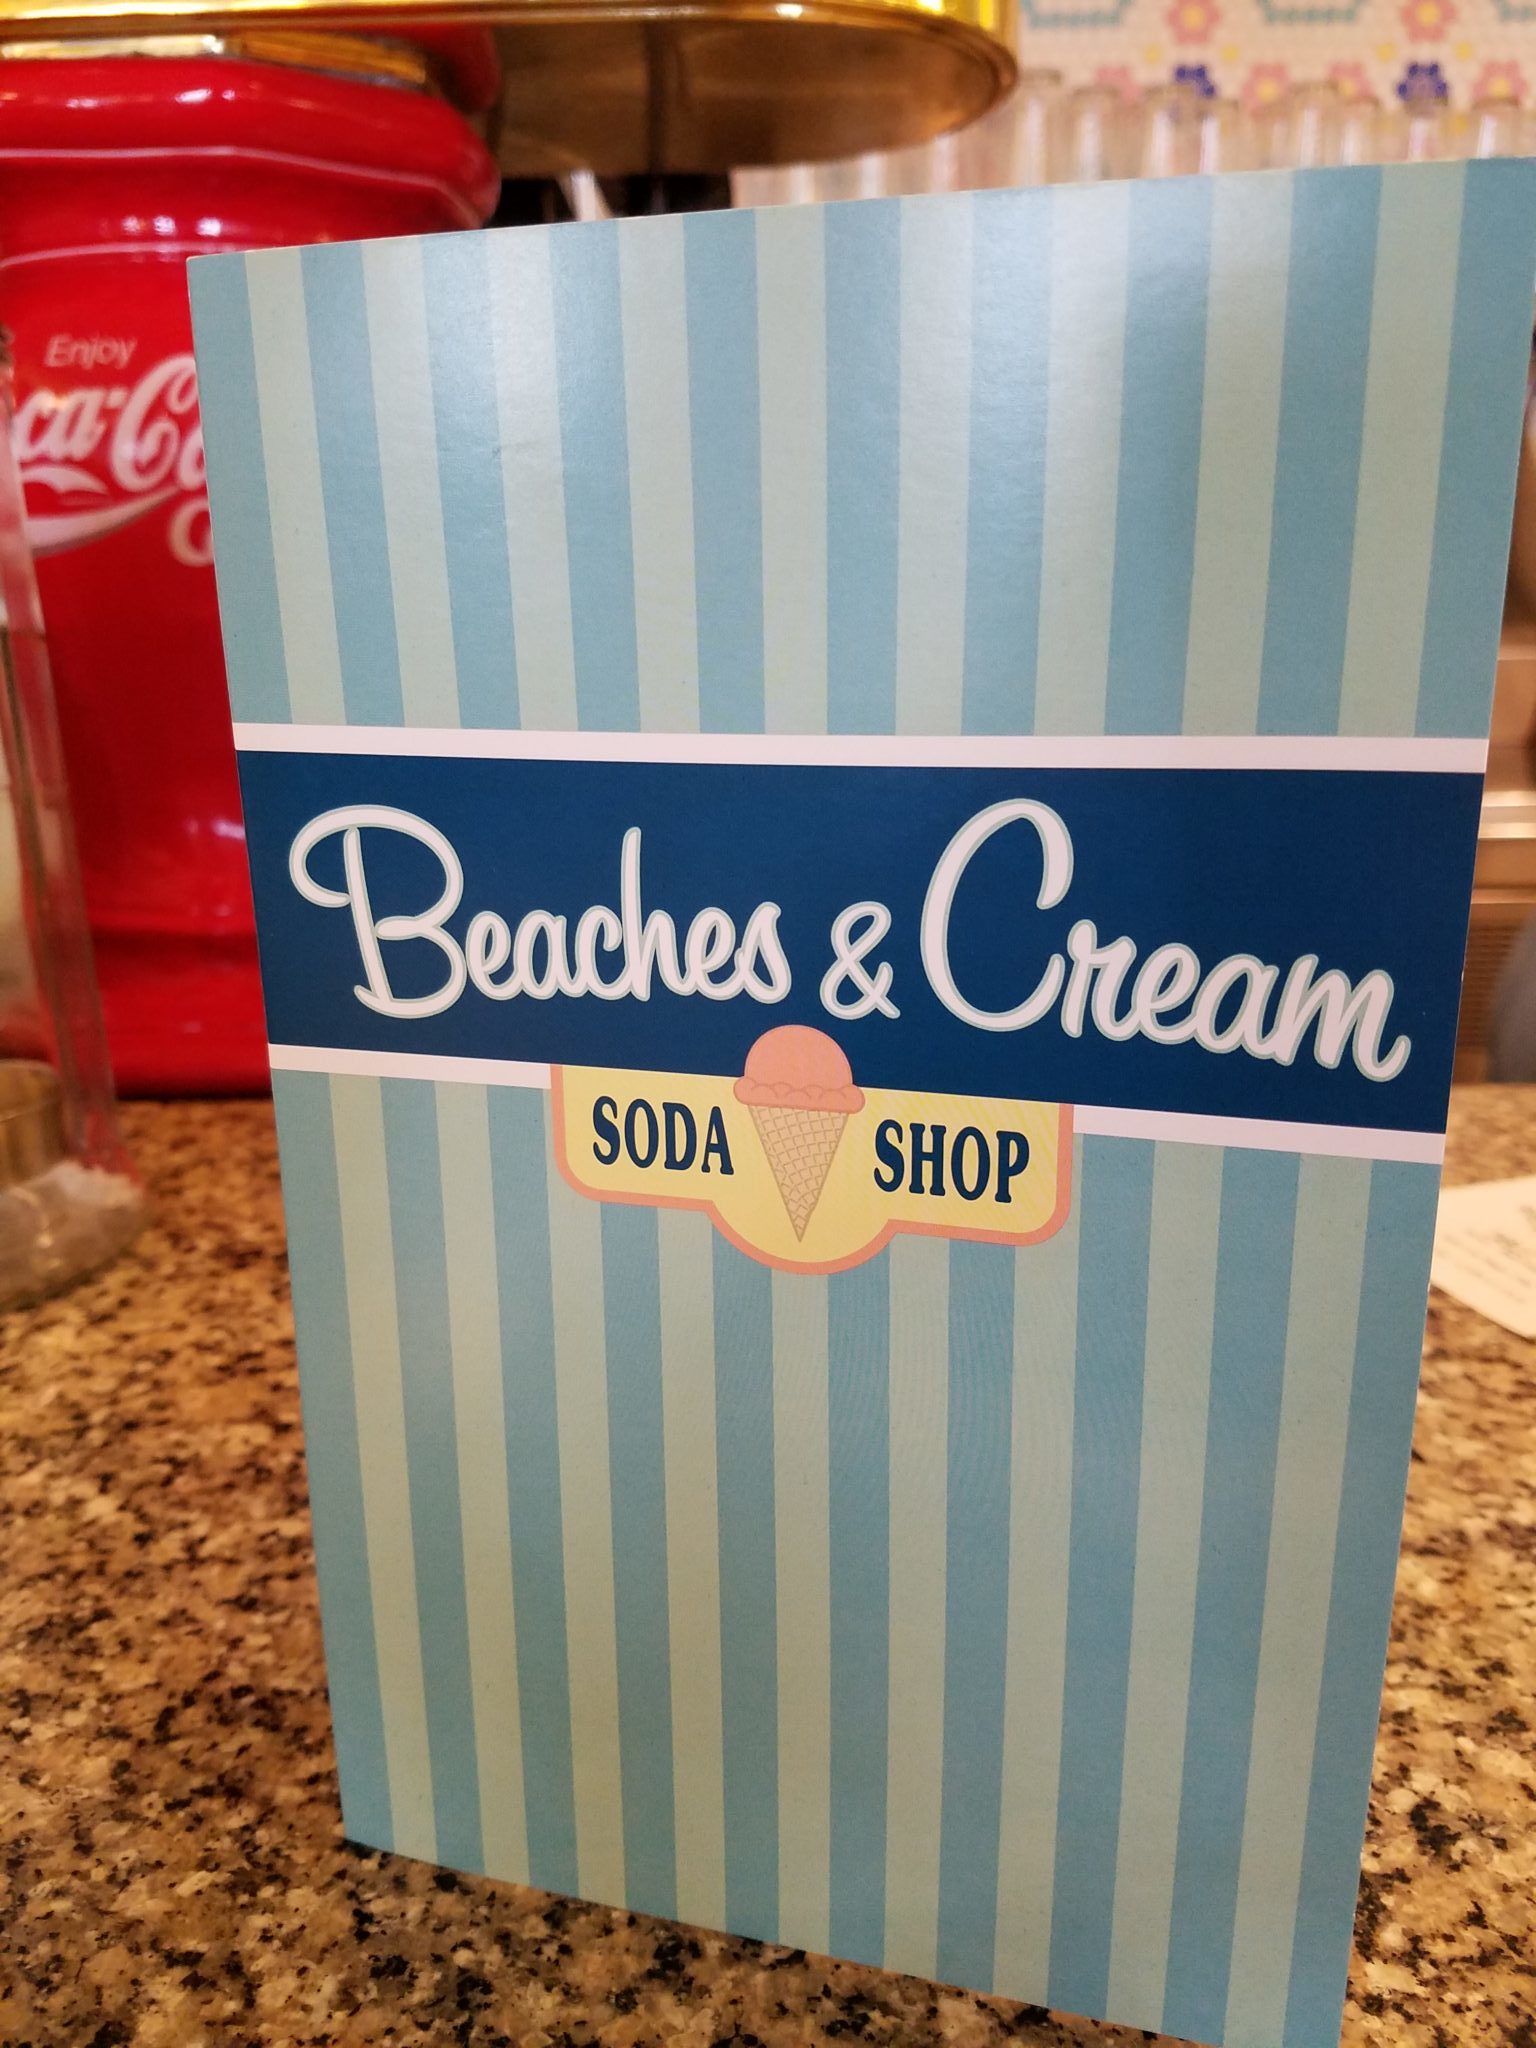 Fall Flavors at the Beaches and Cream Soda Shop